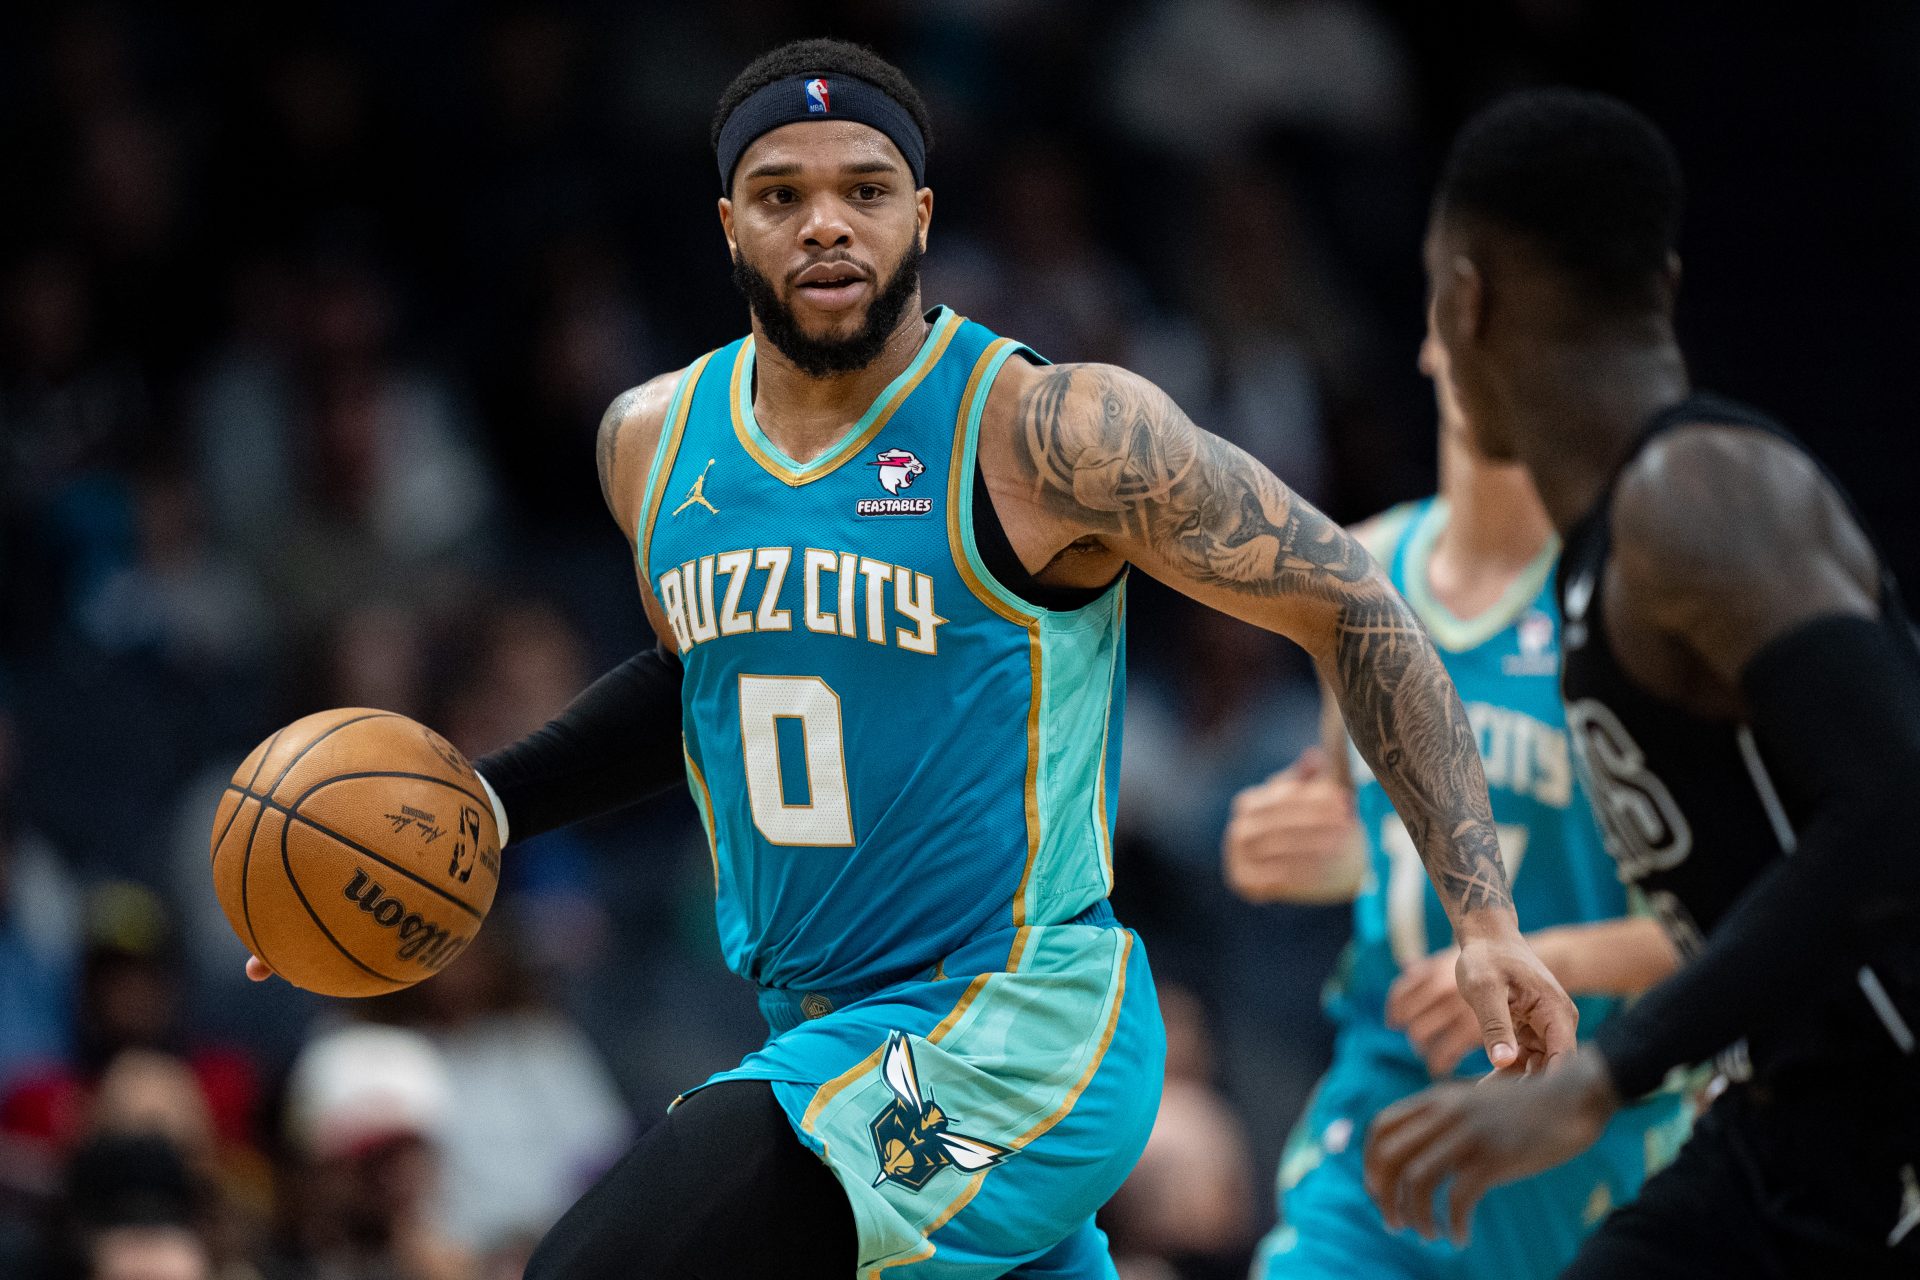 Charlotte Hornets: Acquire point guard insurance